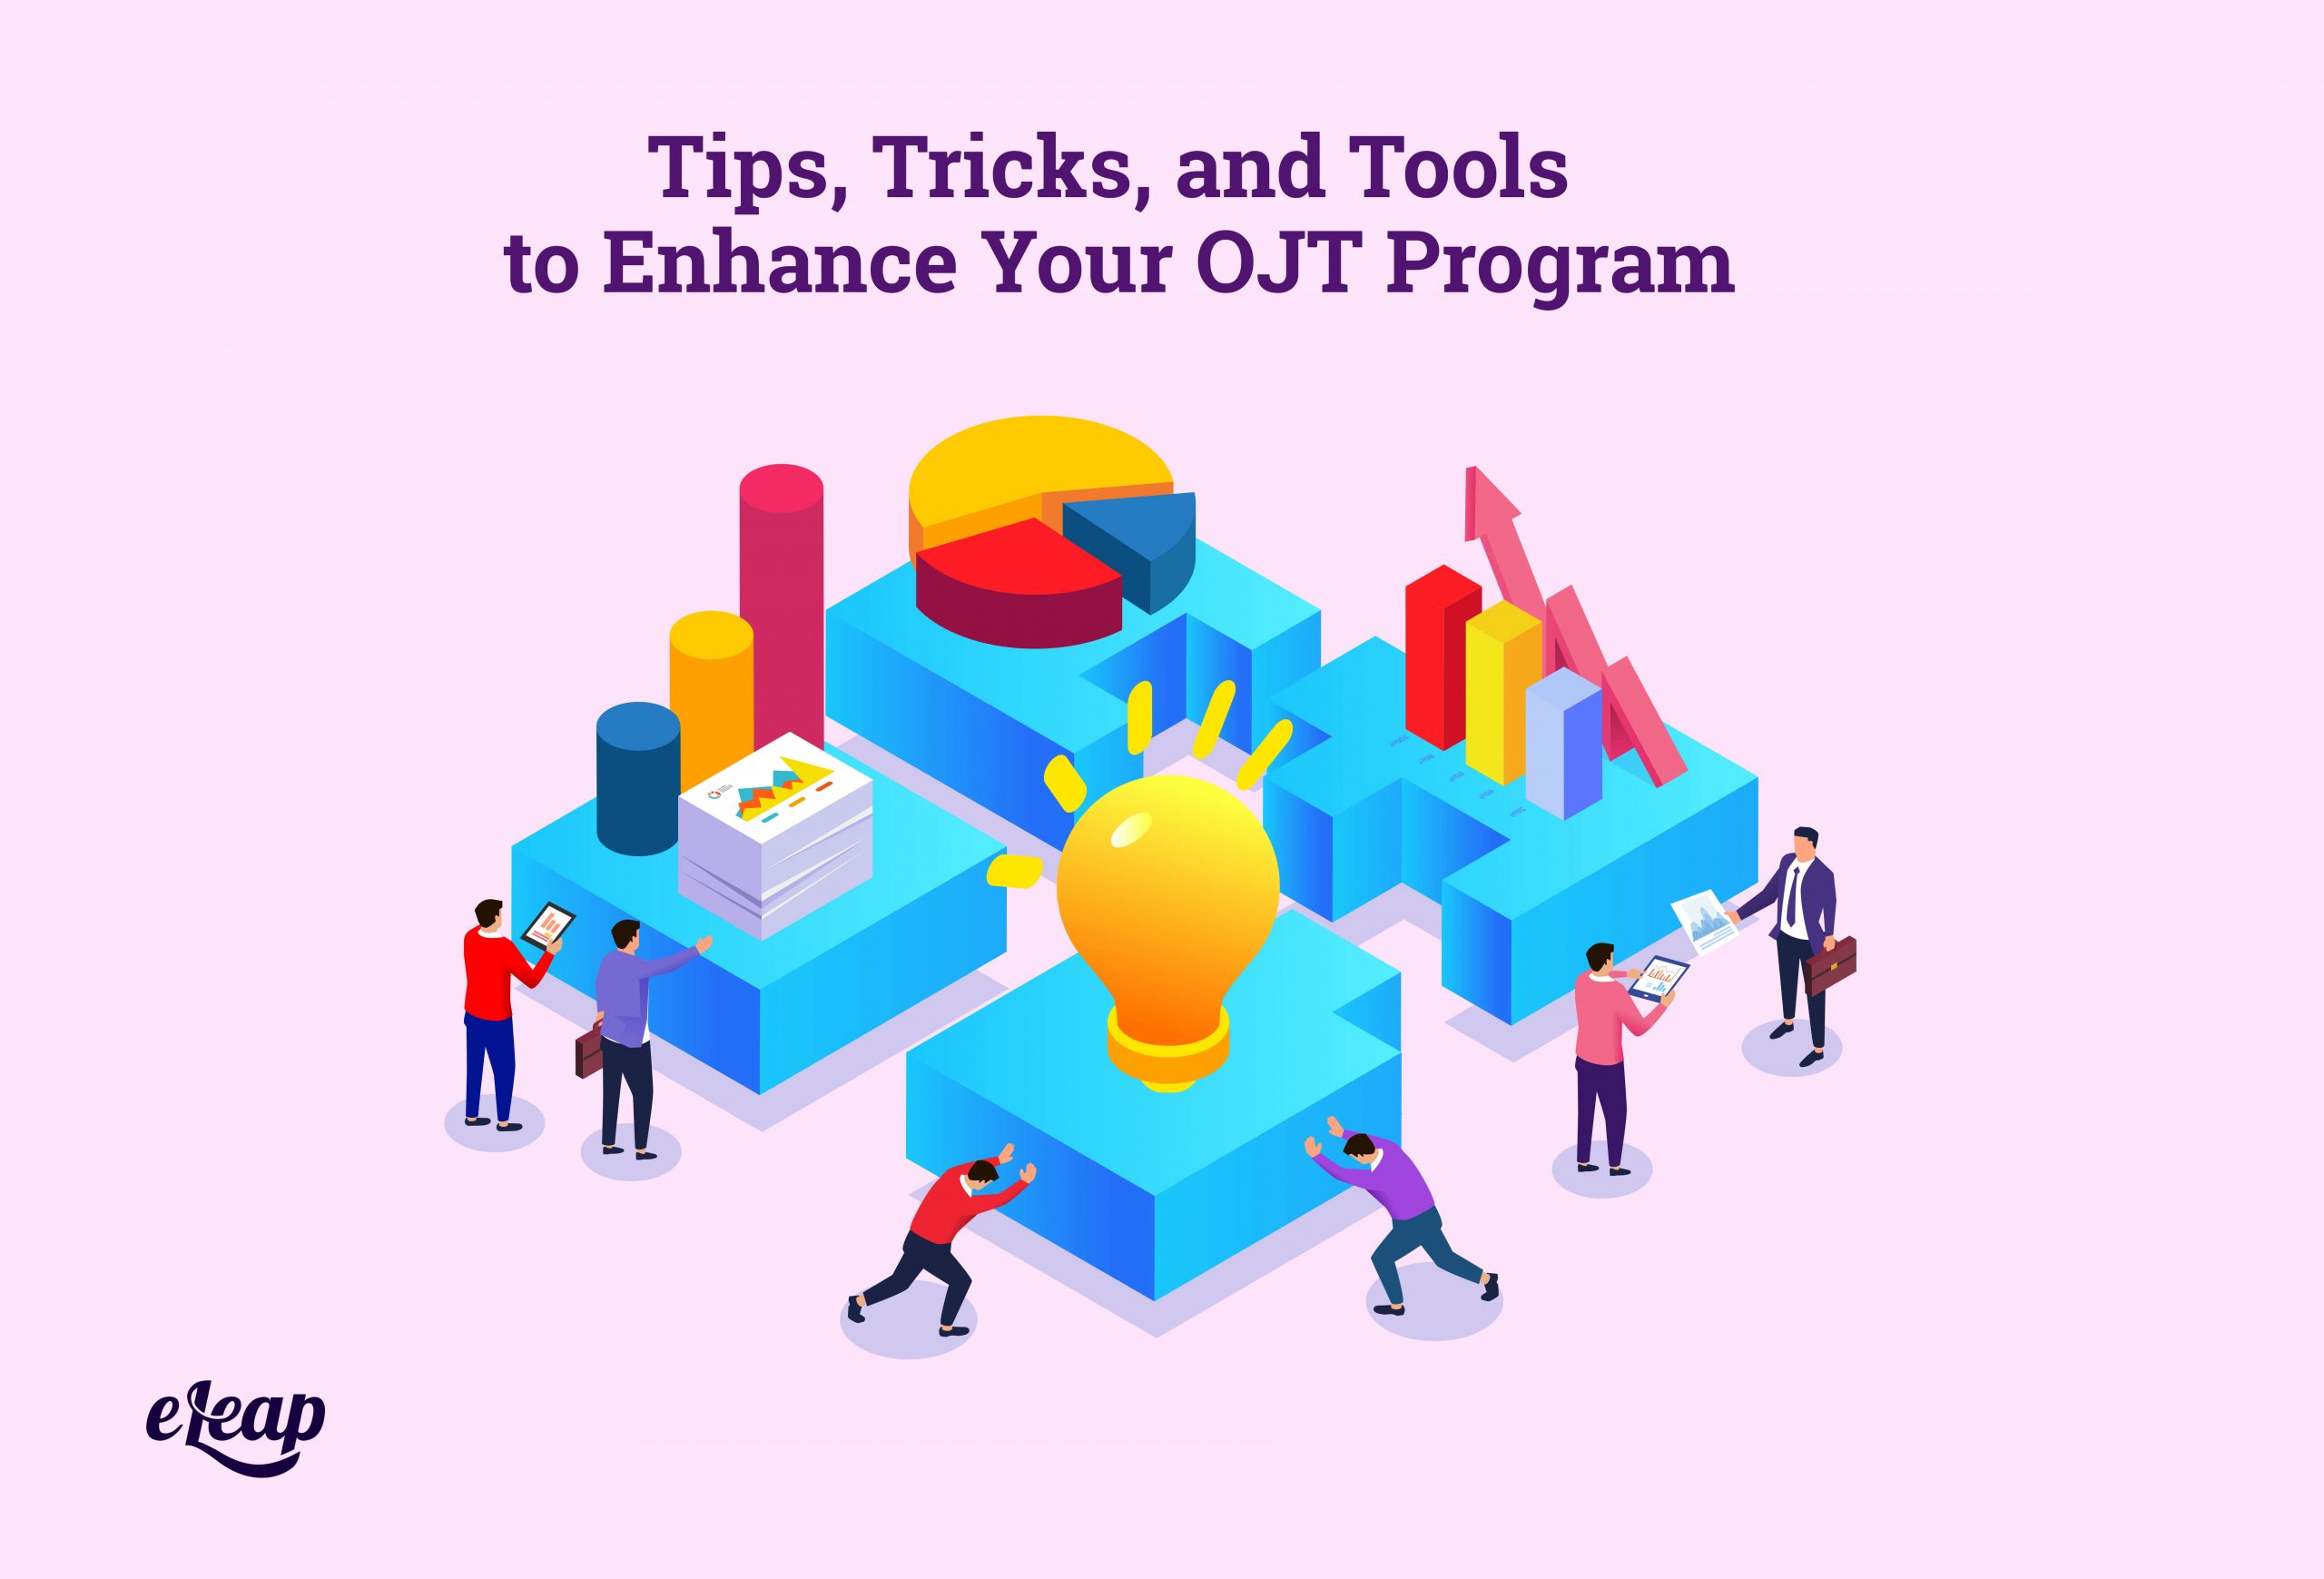 Tips, Tricks, and Tools to Enhance Your OJT Program